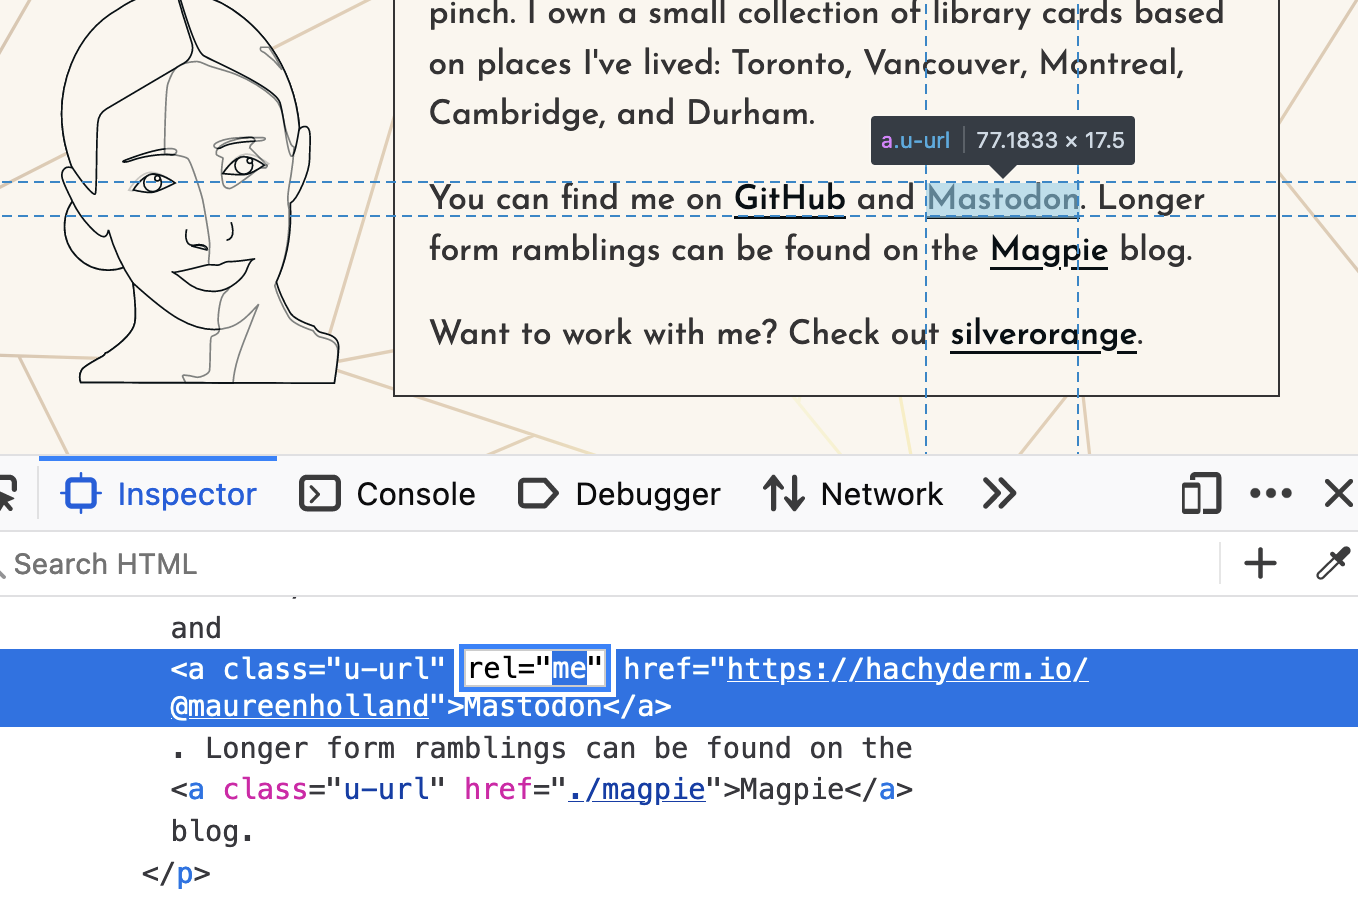 Firefox DevTools open to inspect anchor element with 'Mastodon' text. Focus around 'rel=me' attribute in markup.